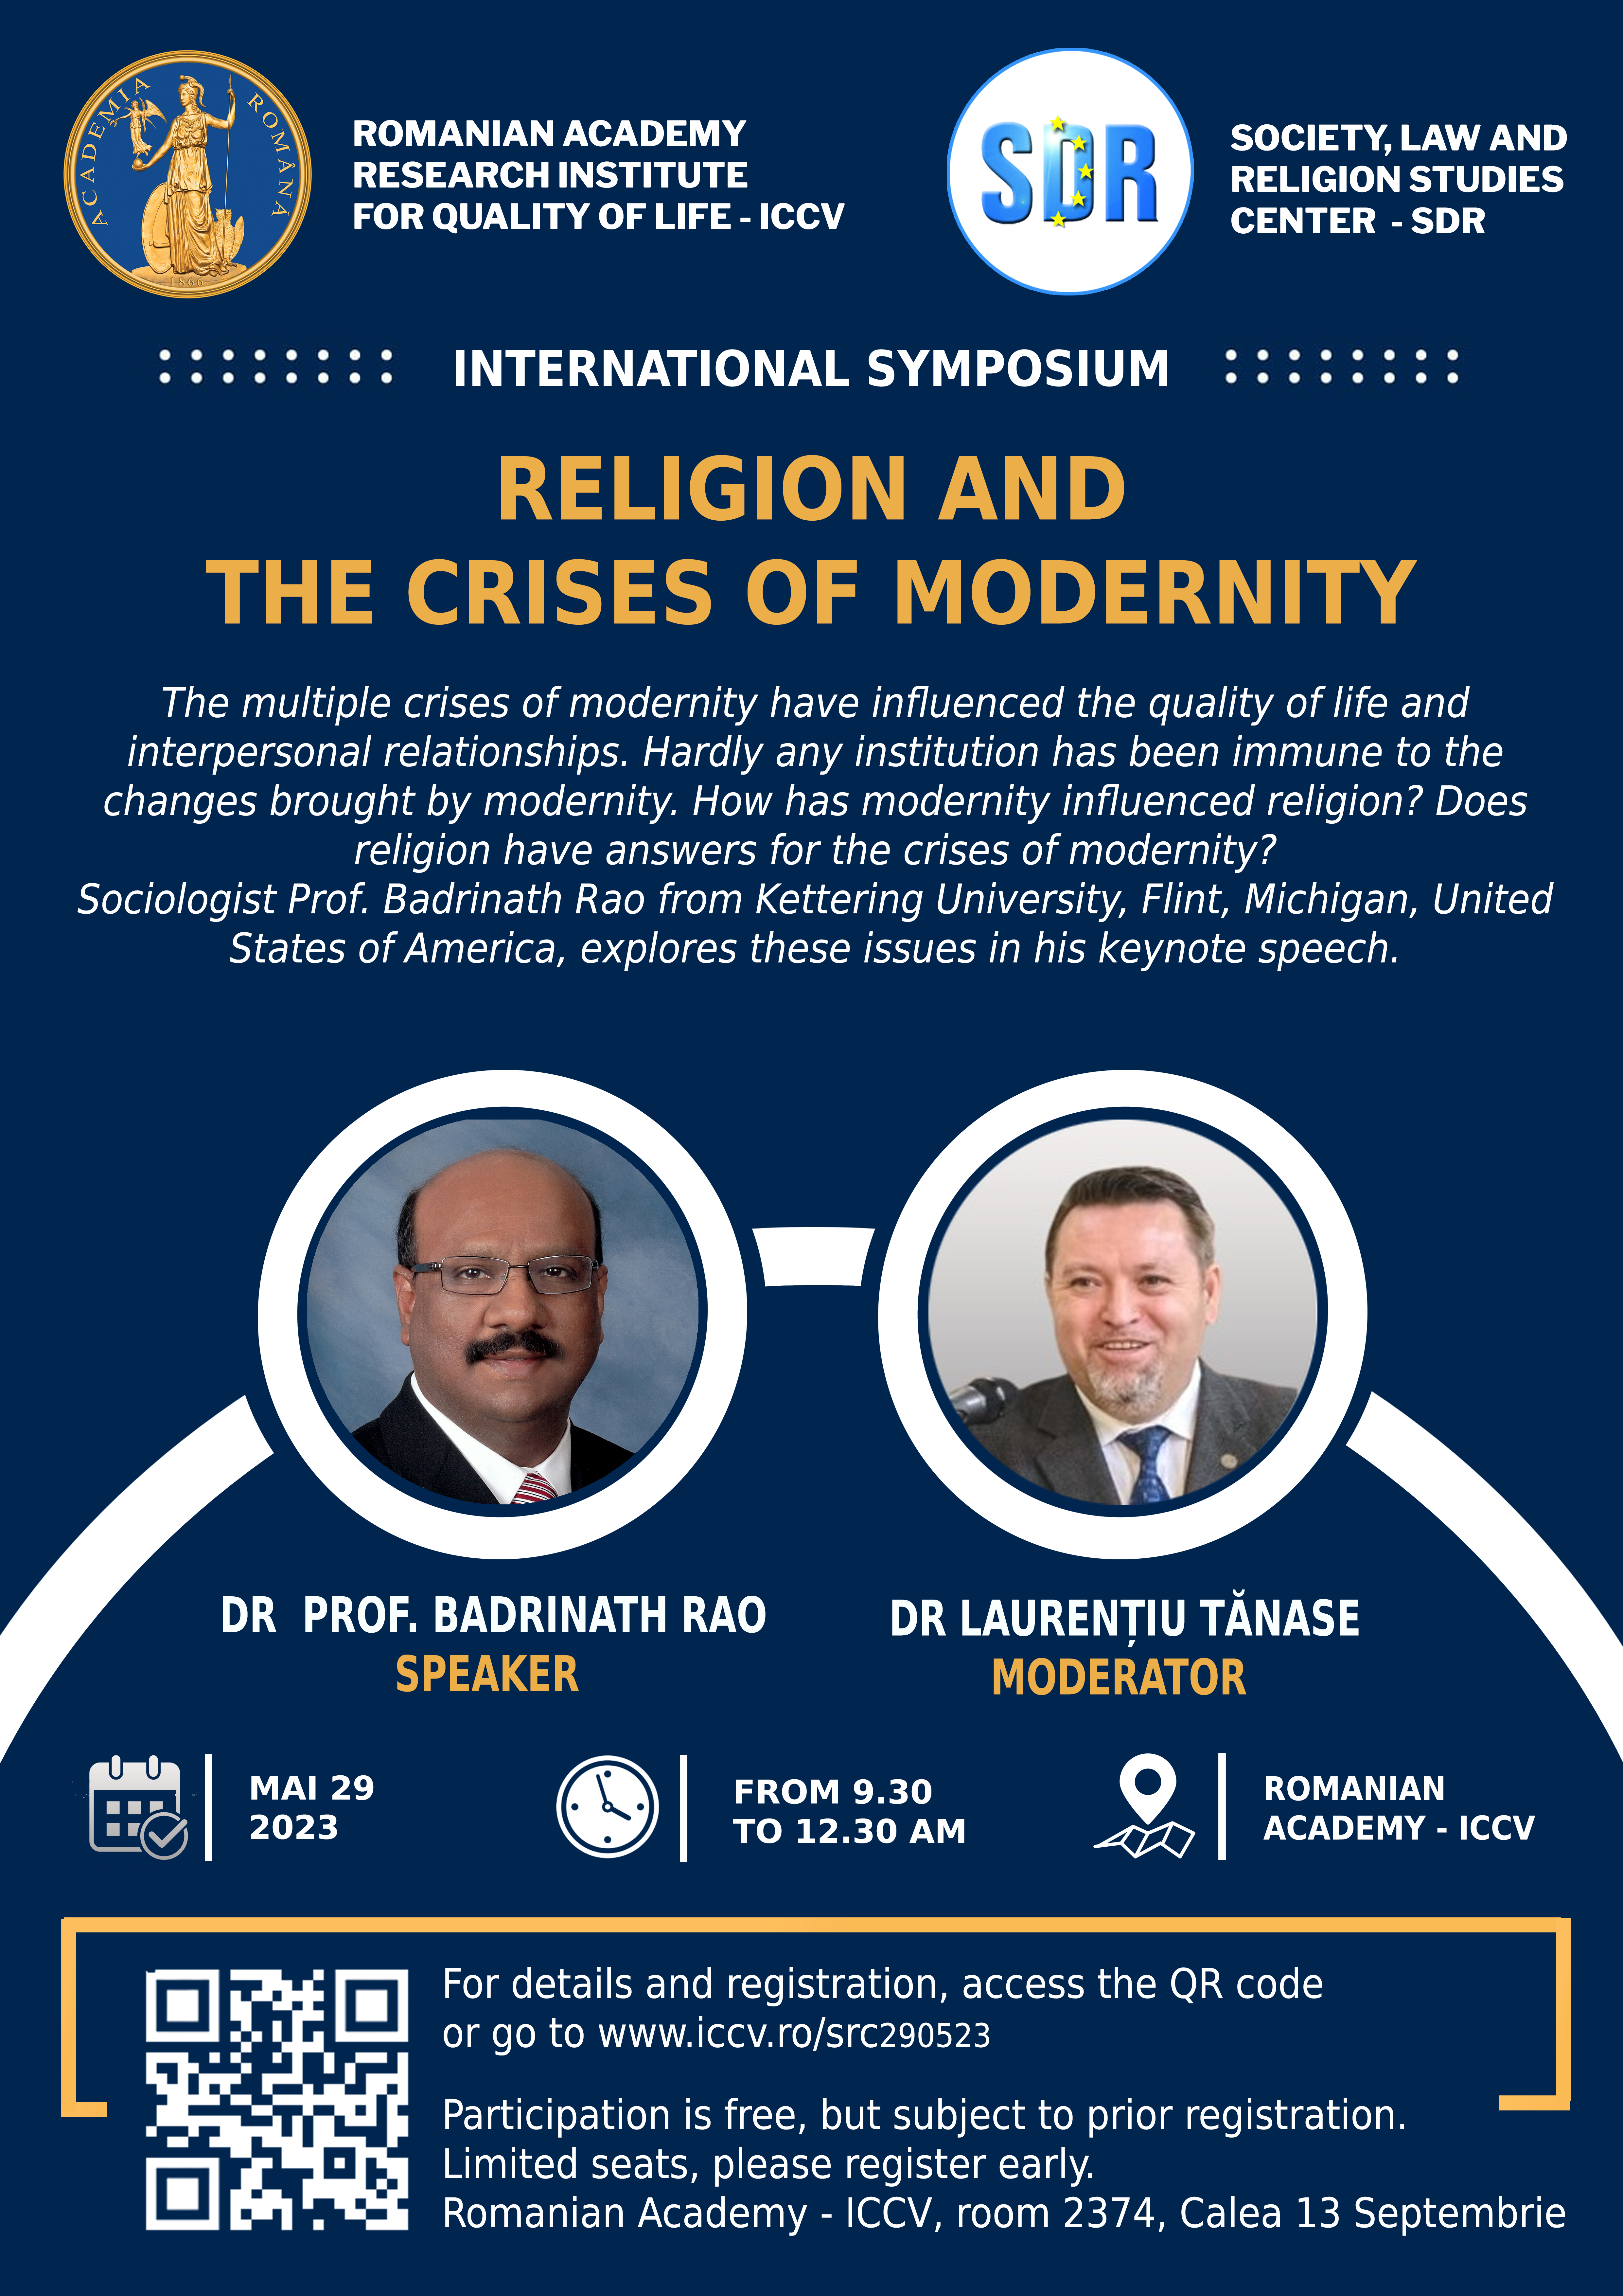 Religion and the crises of modernity